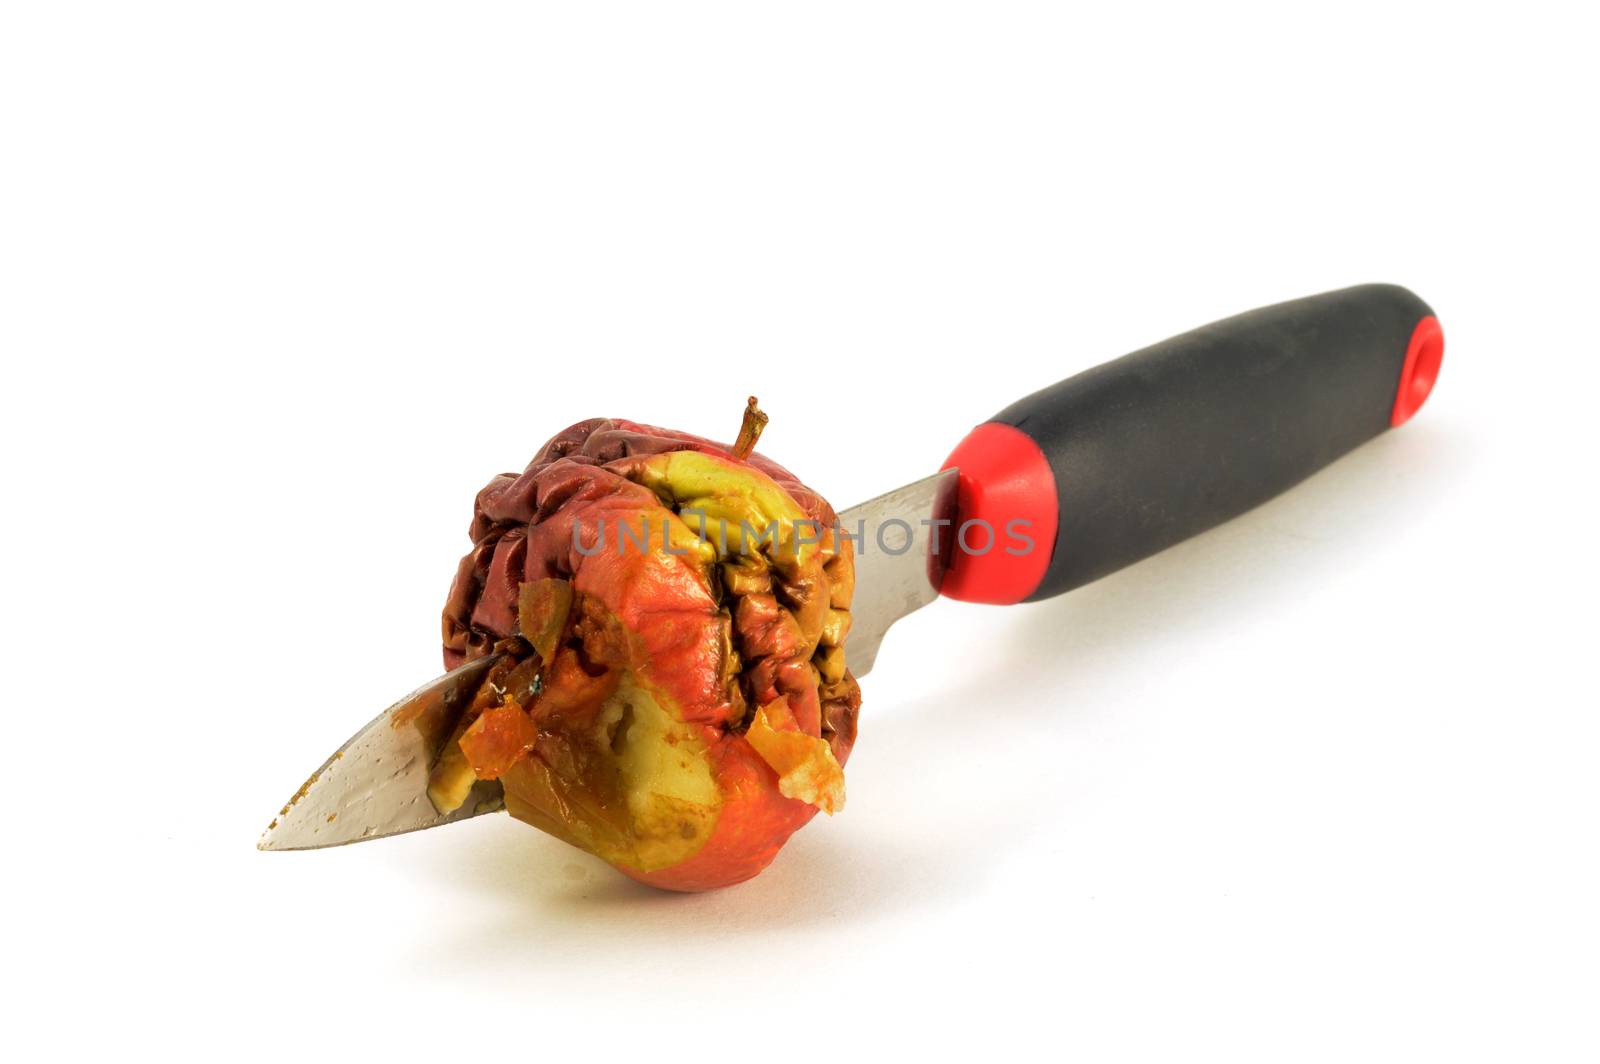 An isolated shot of one bad apple being cut by a knife.